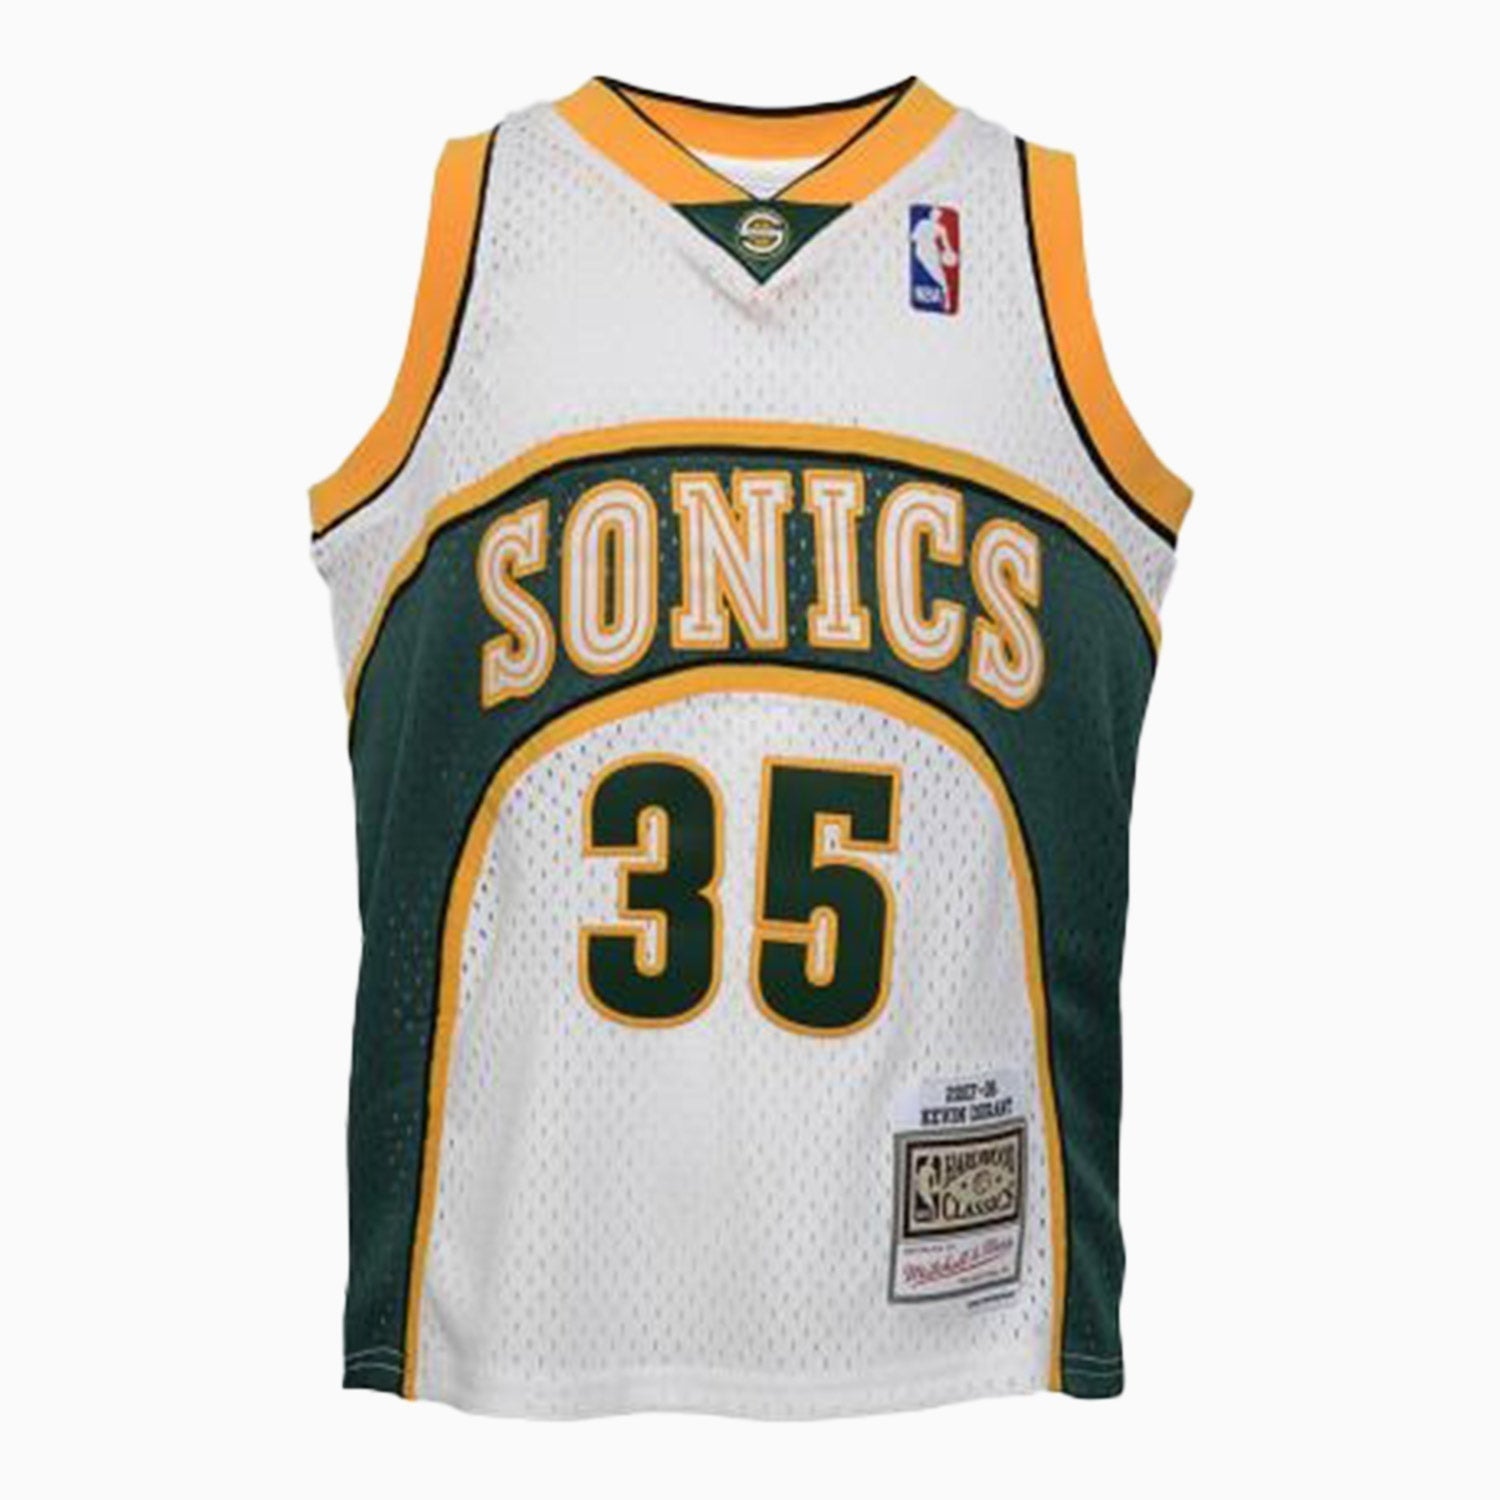 Seattle Supersonics Jersey - 35 Kevin Durant